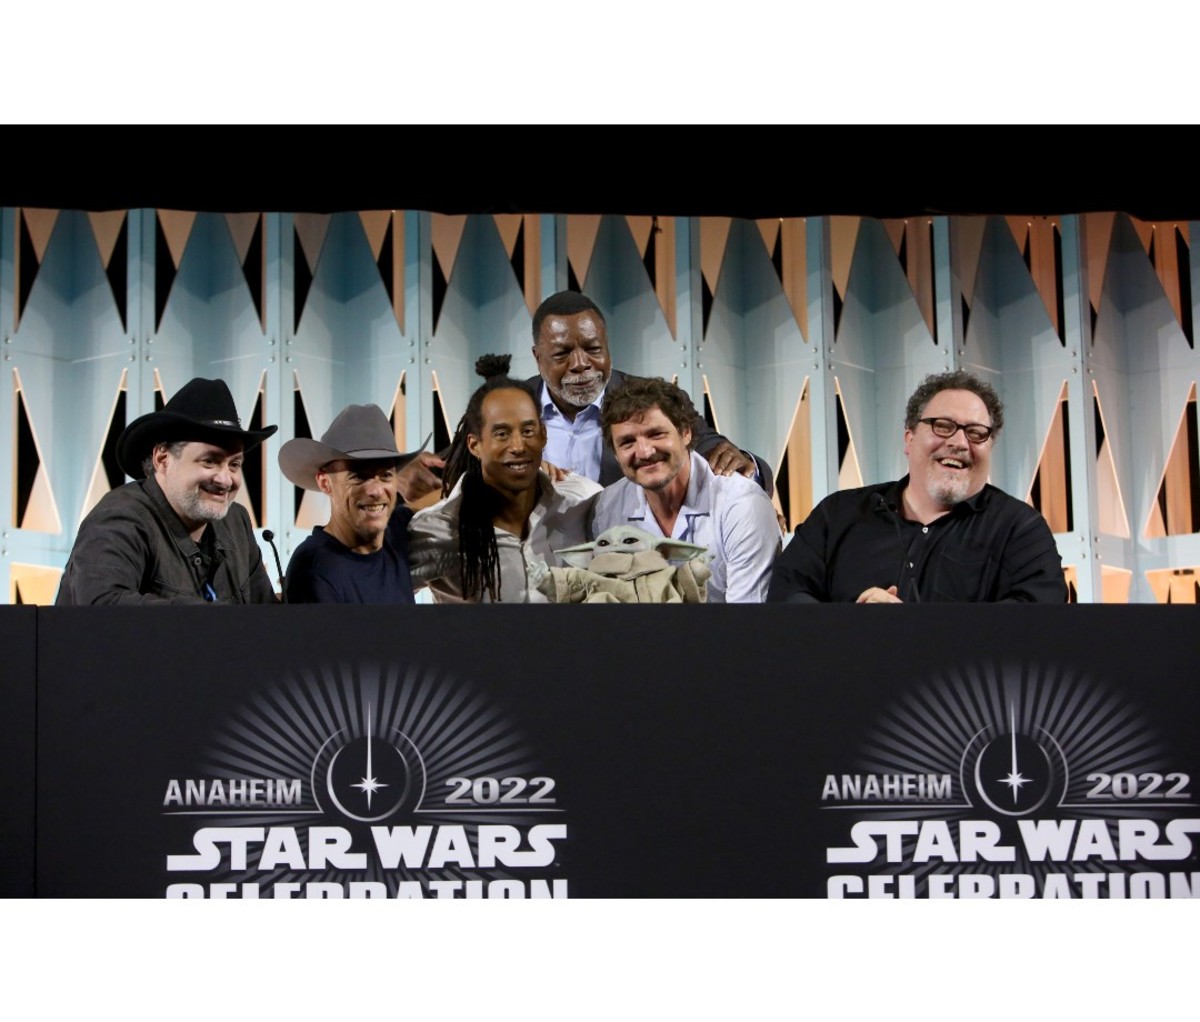 (L-R) Dave Filoni, Brendan Wayne, Lateef Crowder, Carl Weathers, Pedro Pascal and Jon Favreau attend the panel for “The Mandalorian” series at Star Wars Celebration in Anaheim, California on May 28, 2022. (Photo by Jesse Grant/Getty Images for Disney)